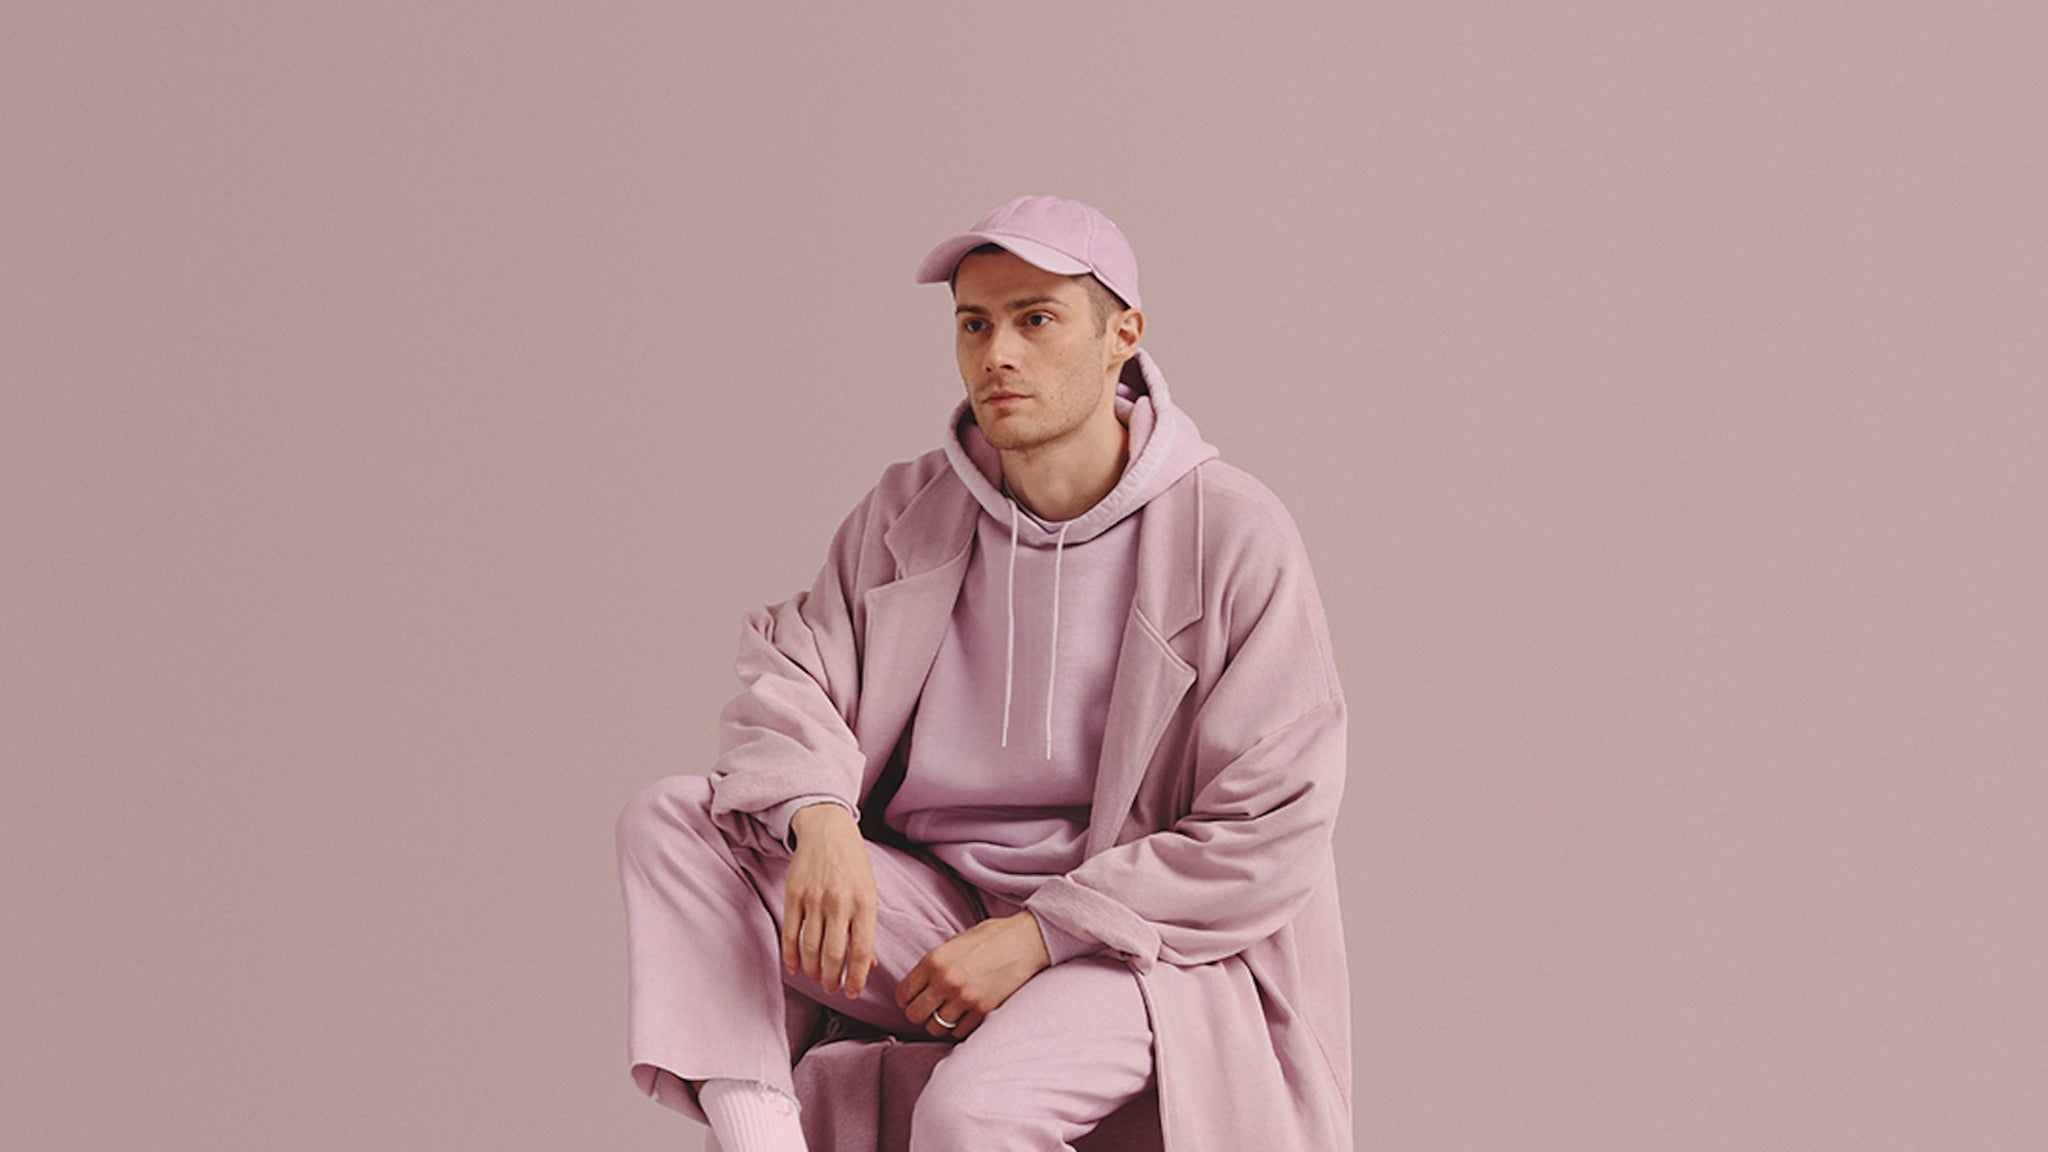 Rac: Boy Tour 2020 in Charlotte promo photo for Spotify presale offer code